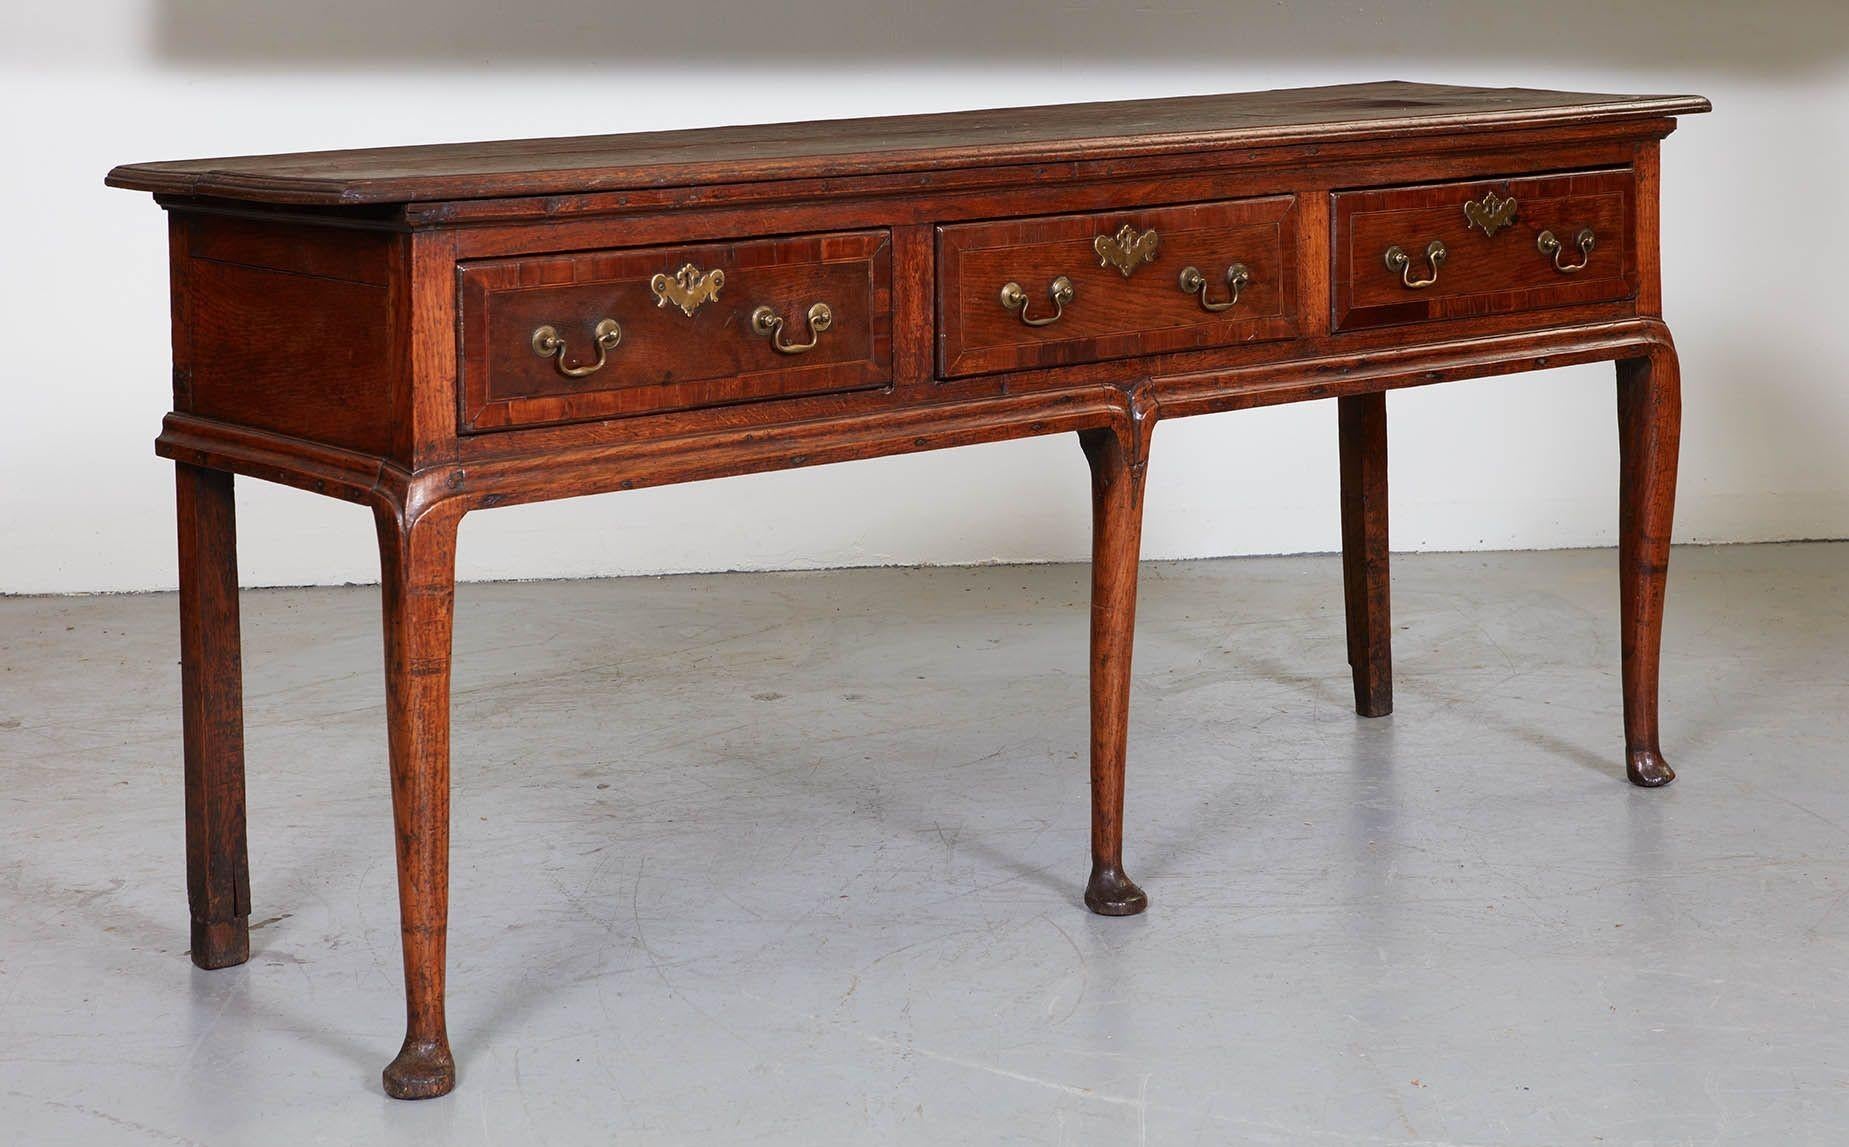 An 18th century English oak dresser base, or sideboard, having overhanging ogee molded top over three feather banded drawers and standing on three cabriole front legs ending in pad feet. The lower apron molding flows artfully in a double line into